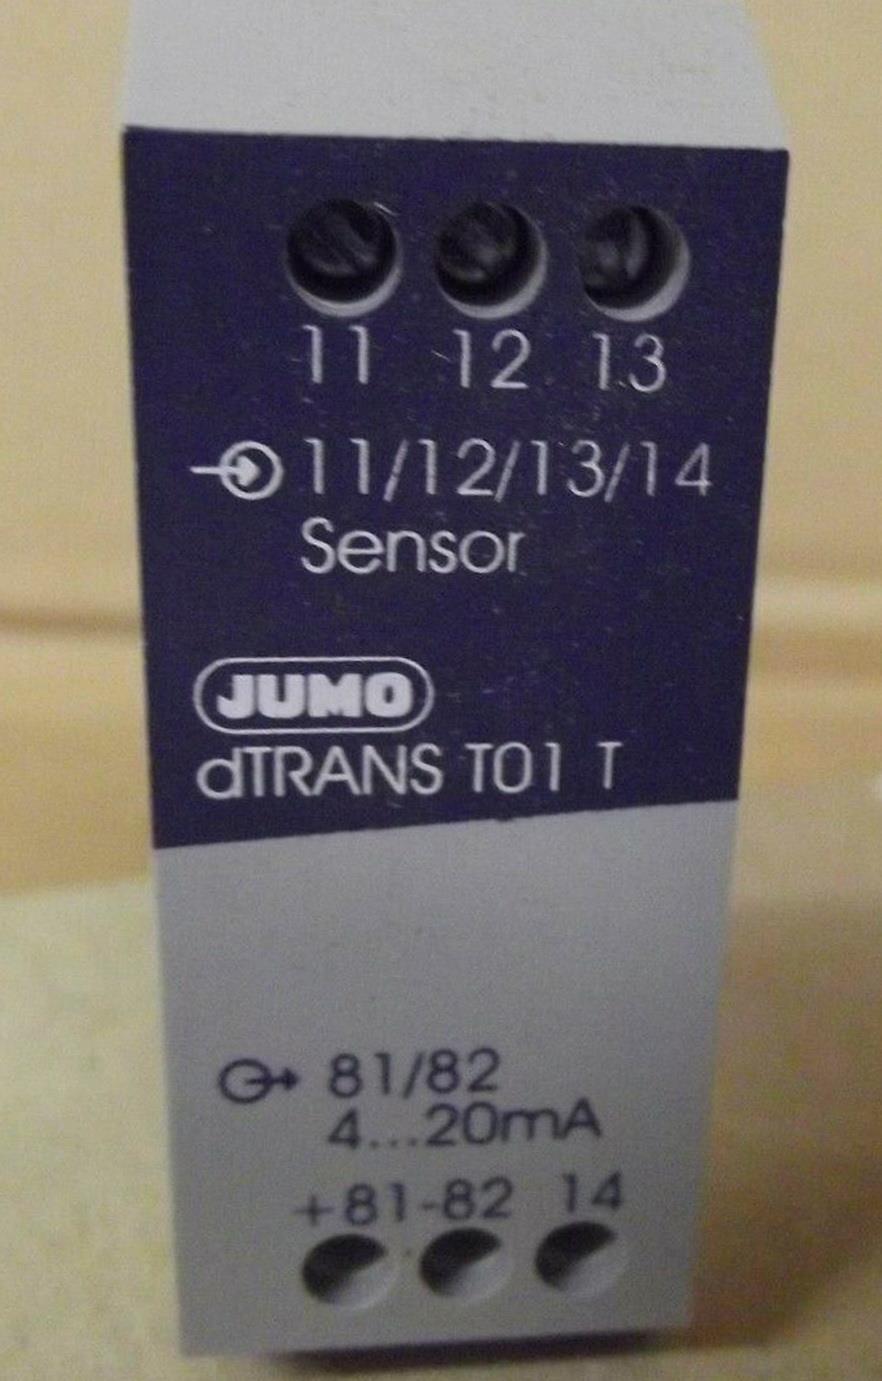 Jumo Dtron T01 Two-Wire Transmitter,Temperature Control, Probe Sensor, Temperature Transmtter, Jumo, Dtron T01, Temperature Transducer, Two-wire Transmitter,Jumo,Instruments and Controls/Indicators